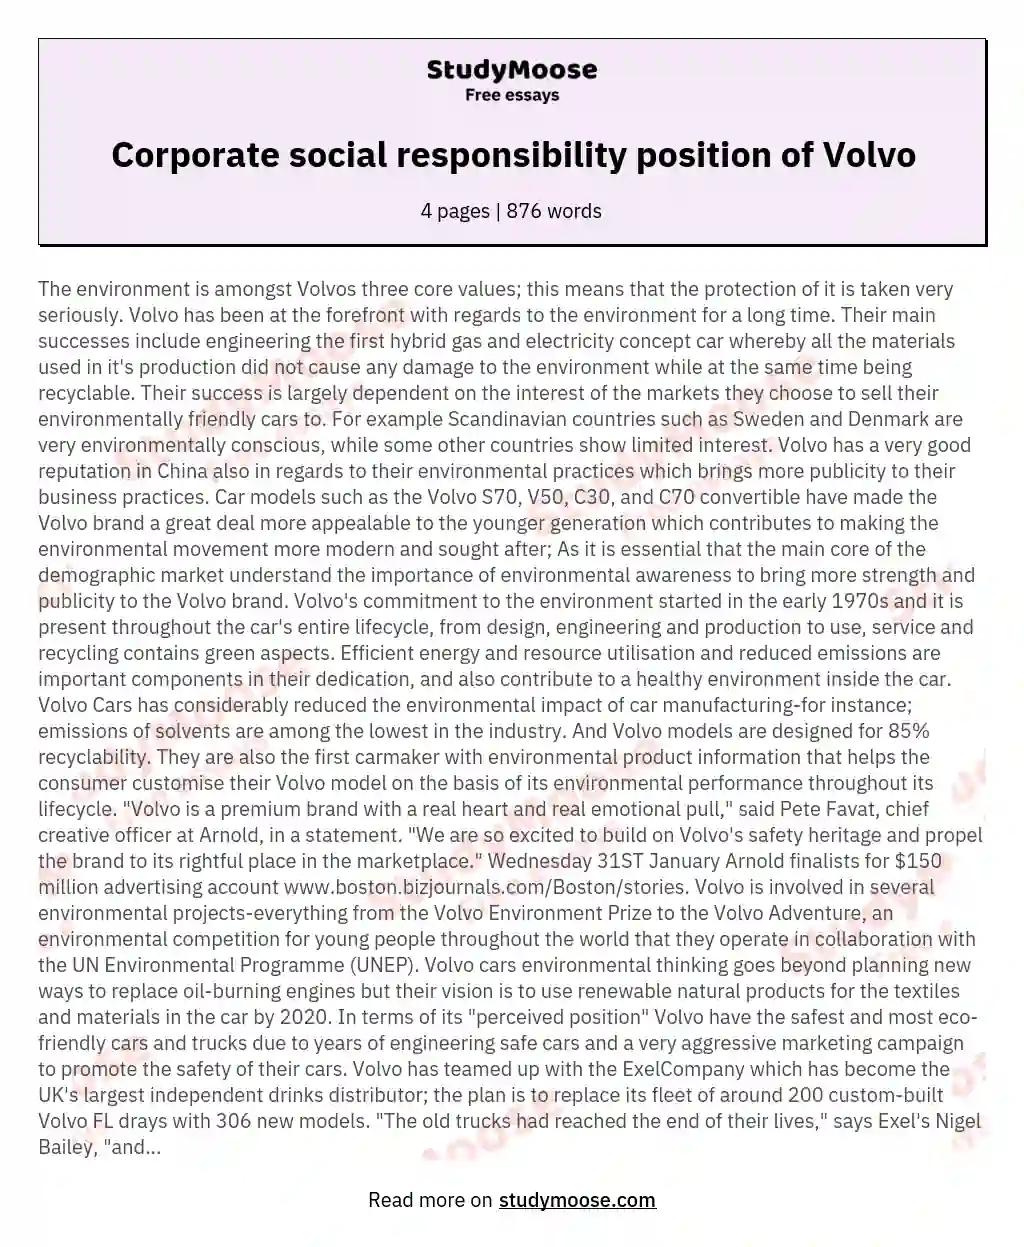 Corporate social responsibility position of Volvo